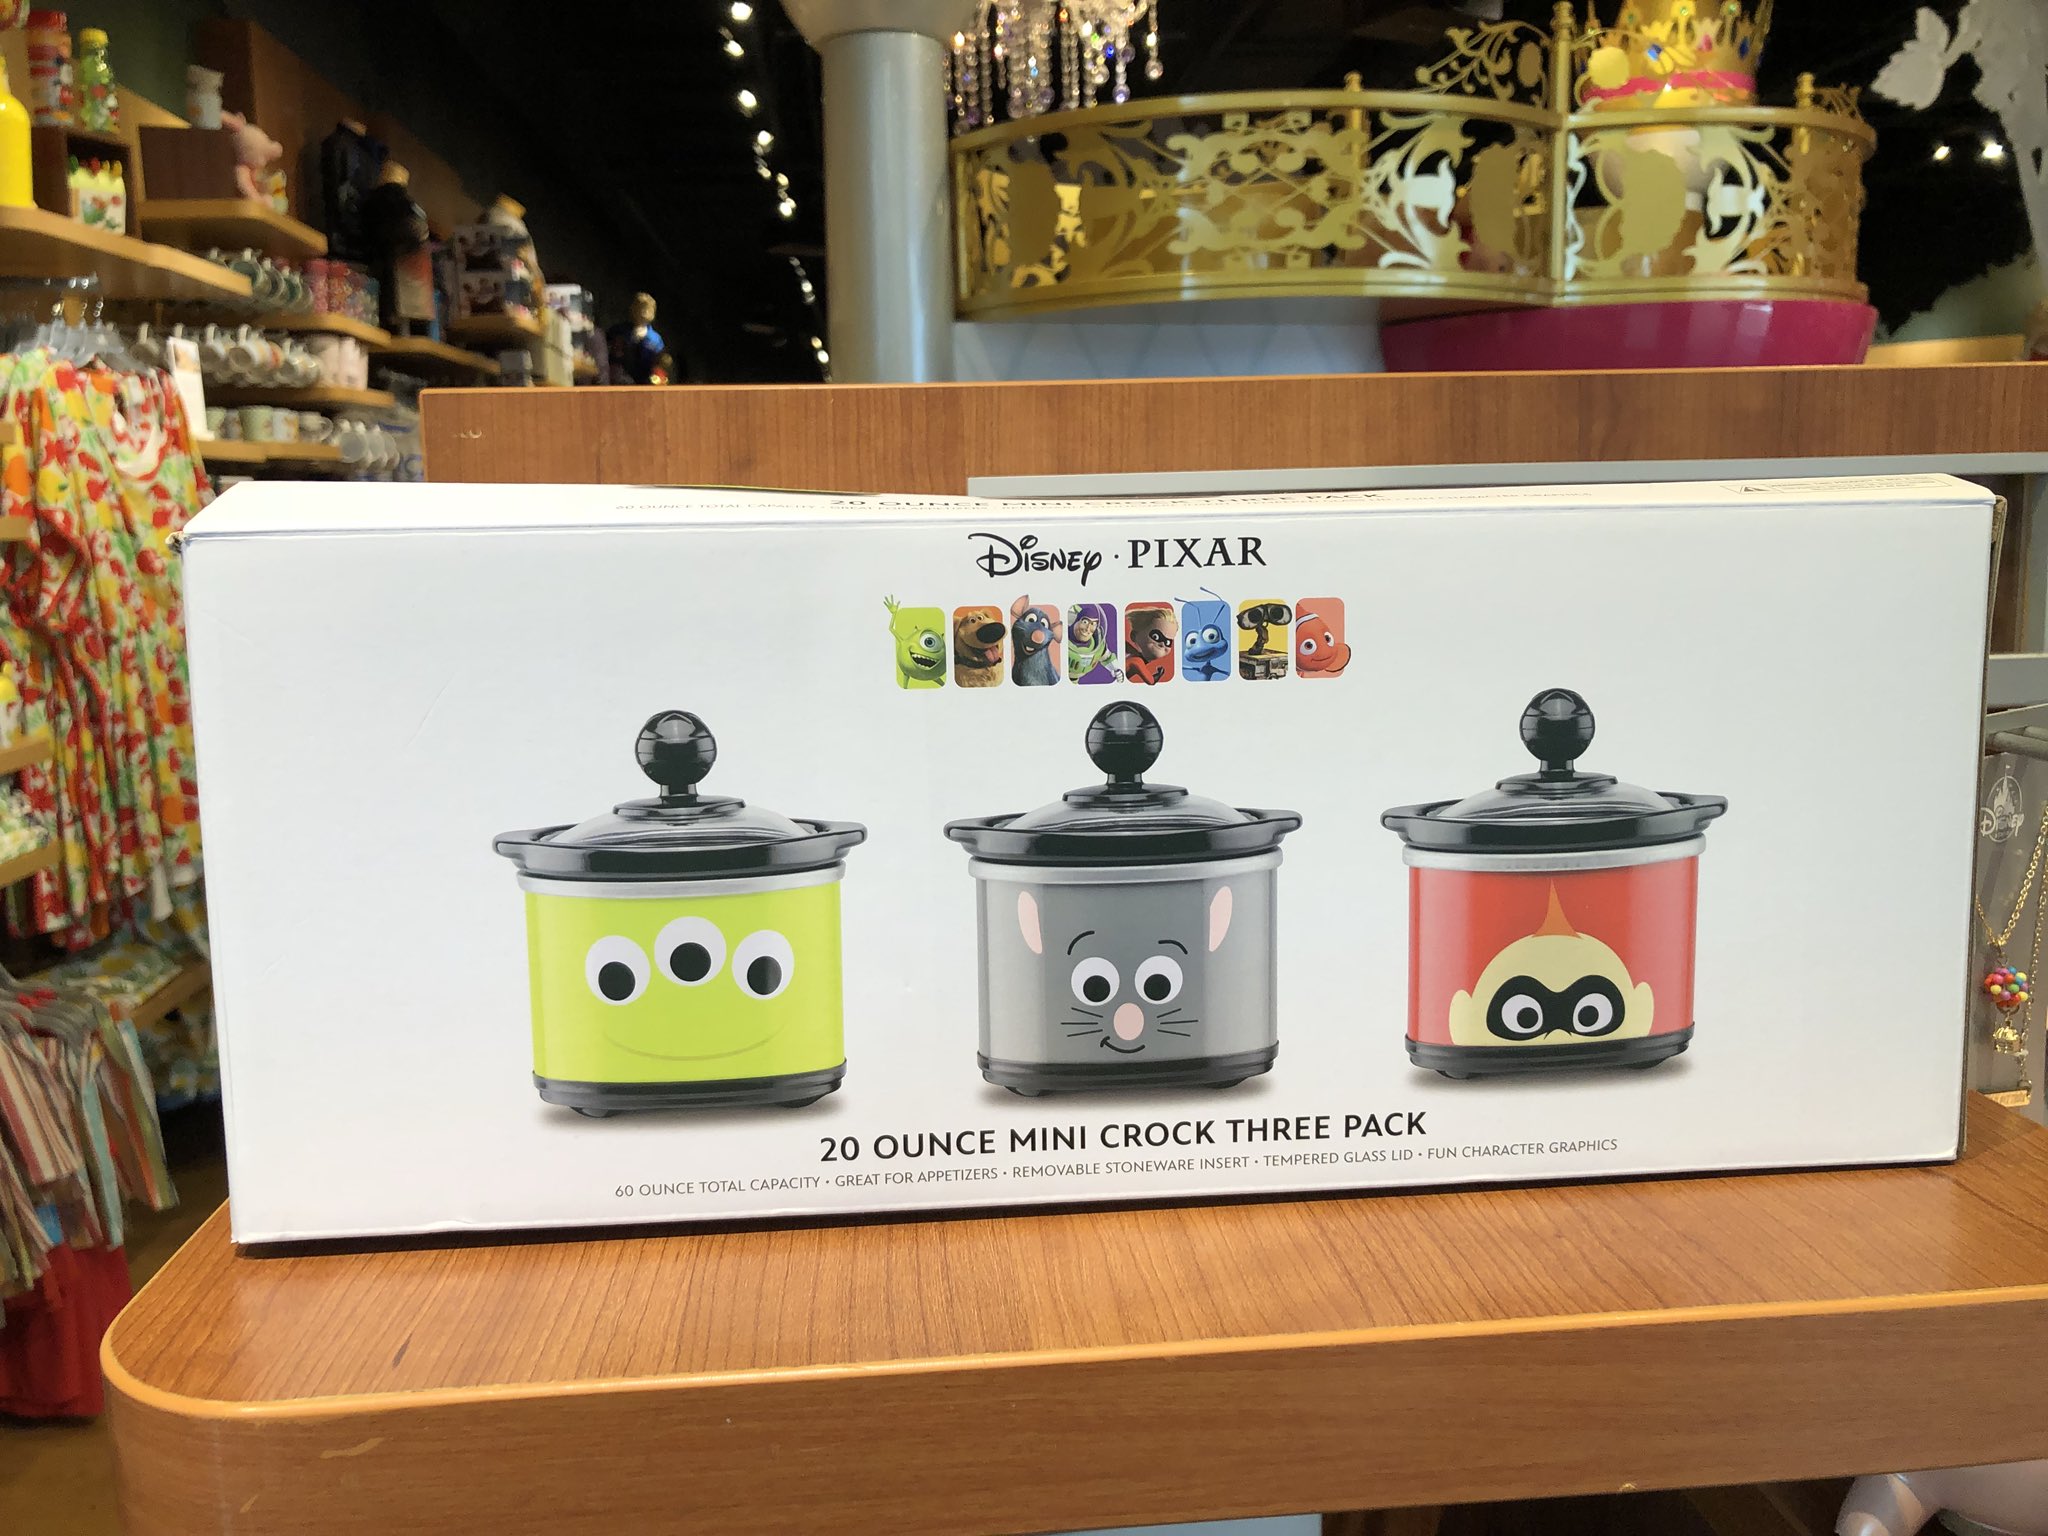 ThrillGeek on X: This mini crock pot set was also adorable